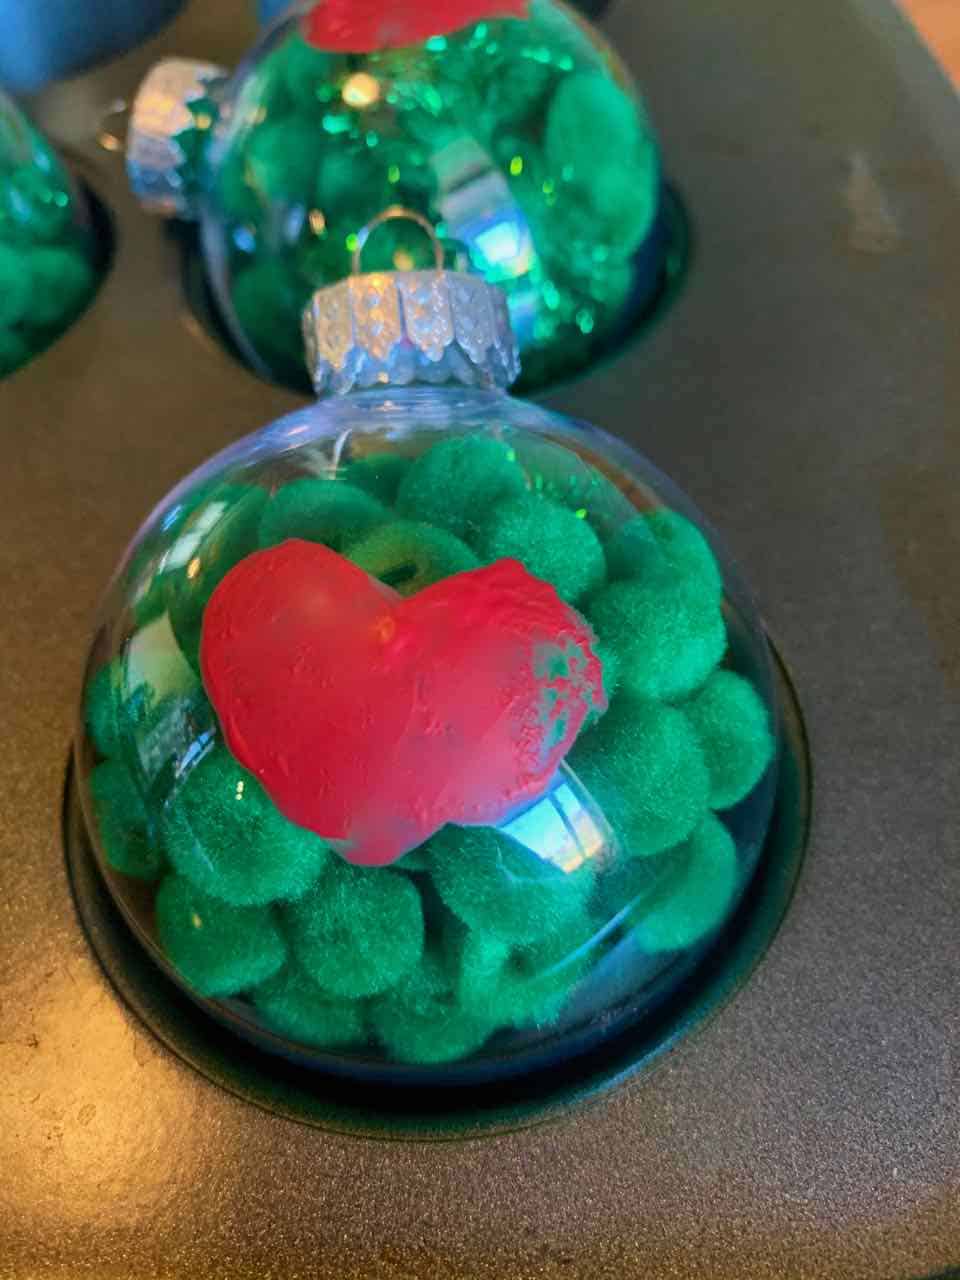 If you're looking for an easy Christmas ornament craft, this super cute Grinch-themed DIY holiday ornament is perfect!